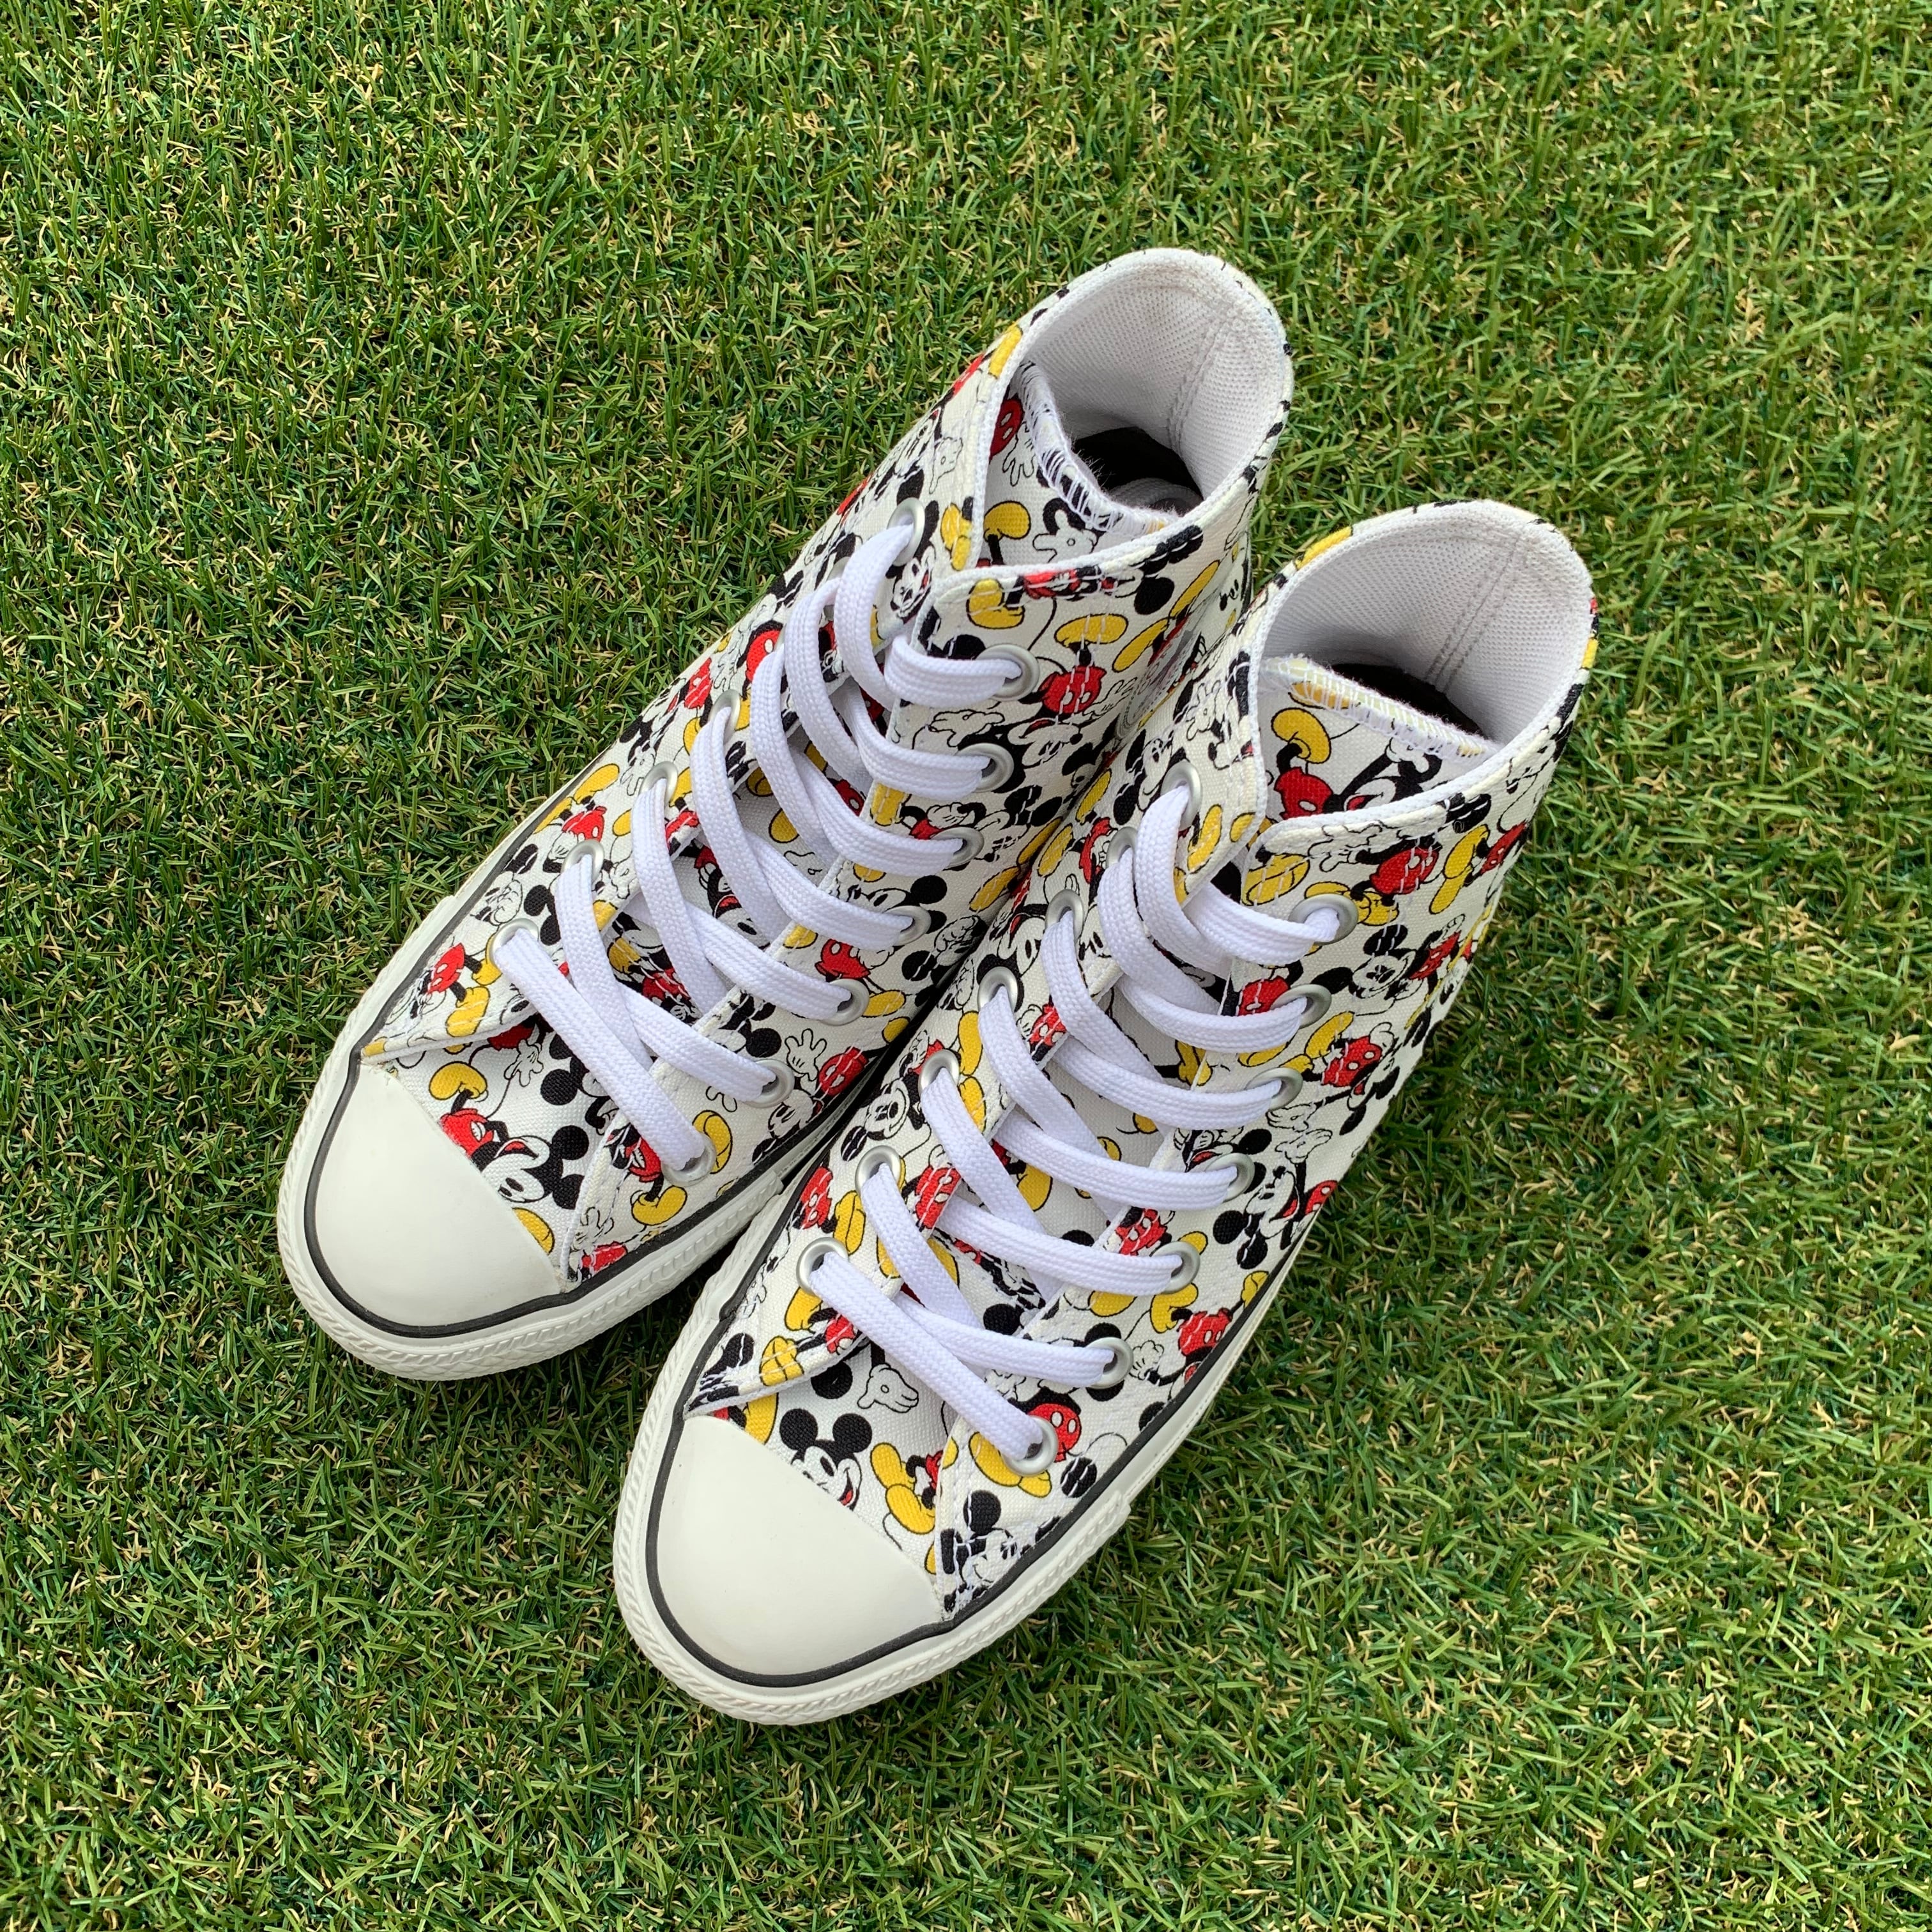 converse ALL STAR 100 MICKEY MOUSE PT HI